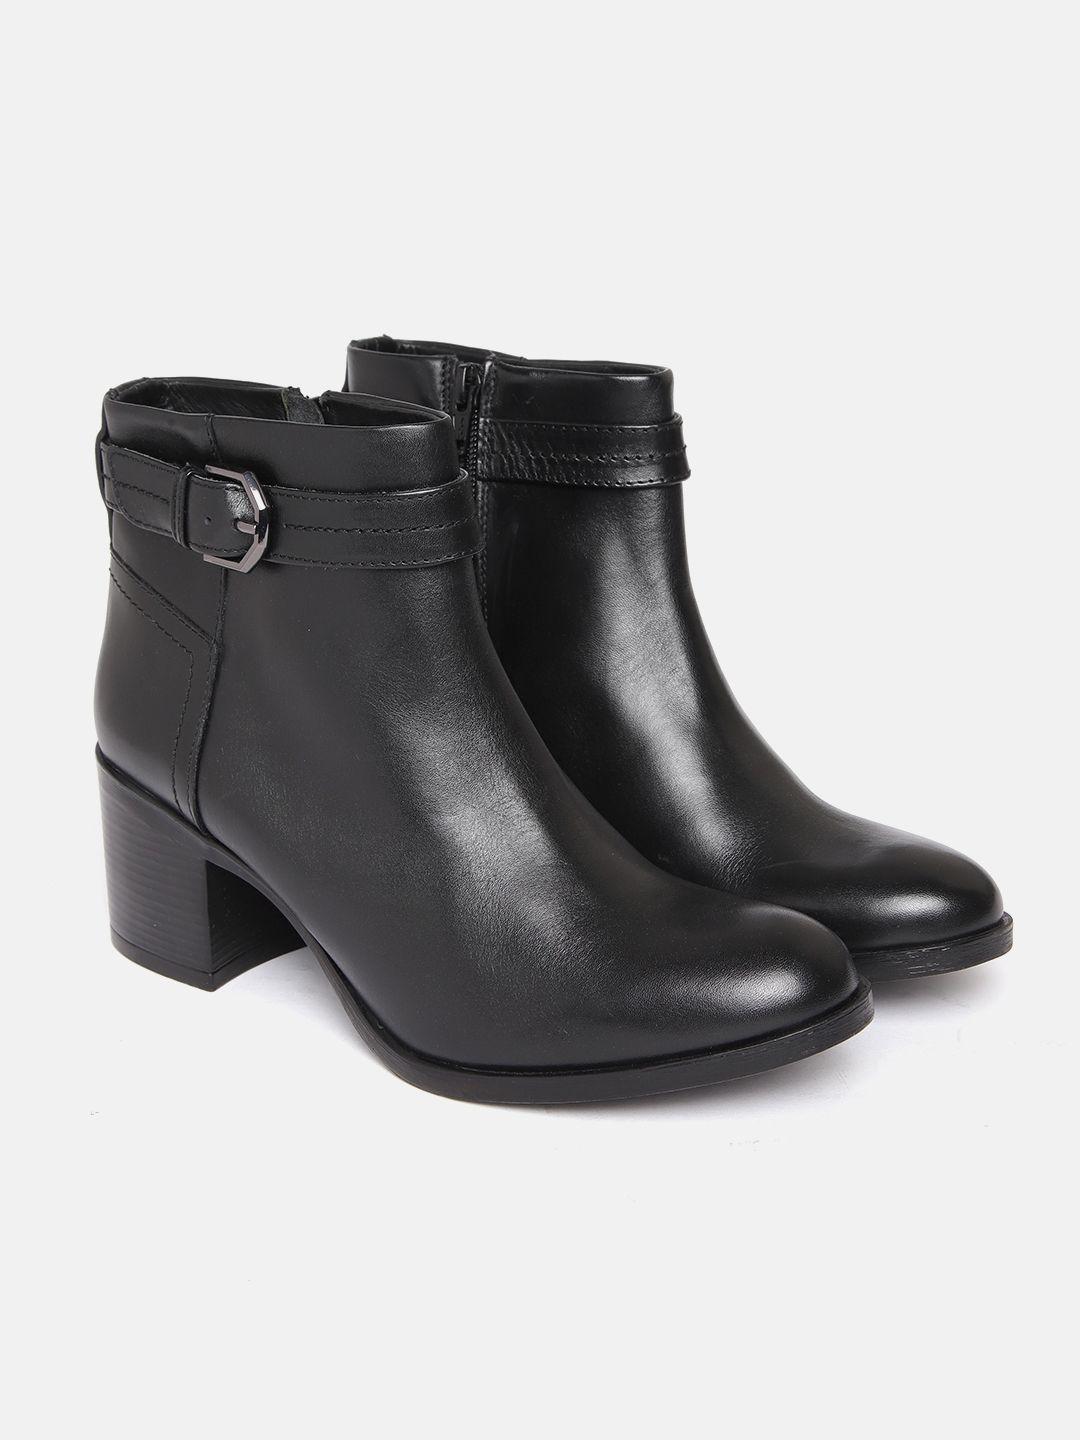 geox women black leather heeled ankle boots